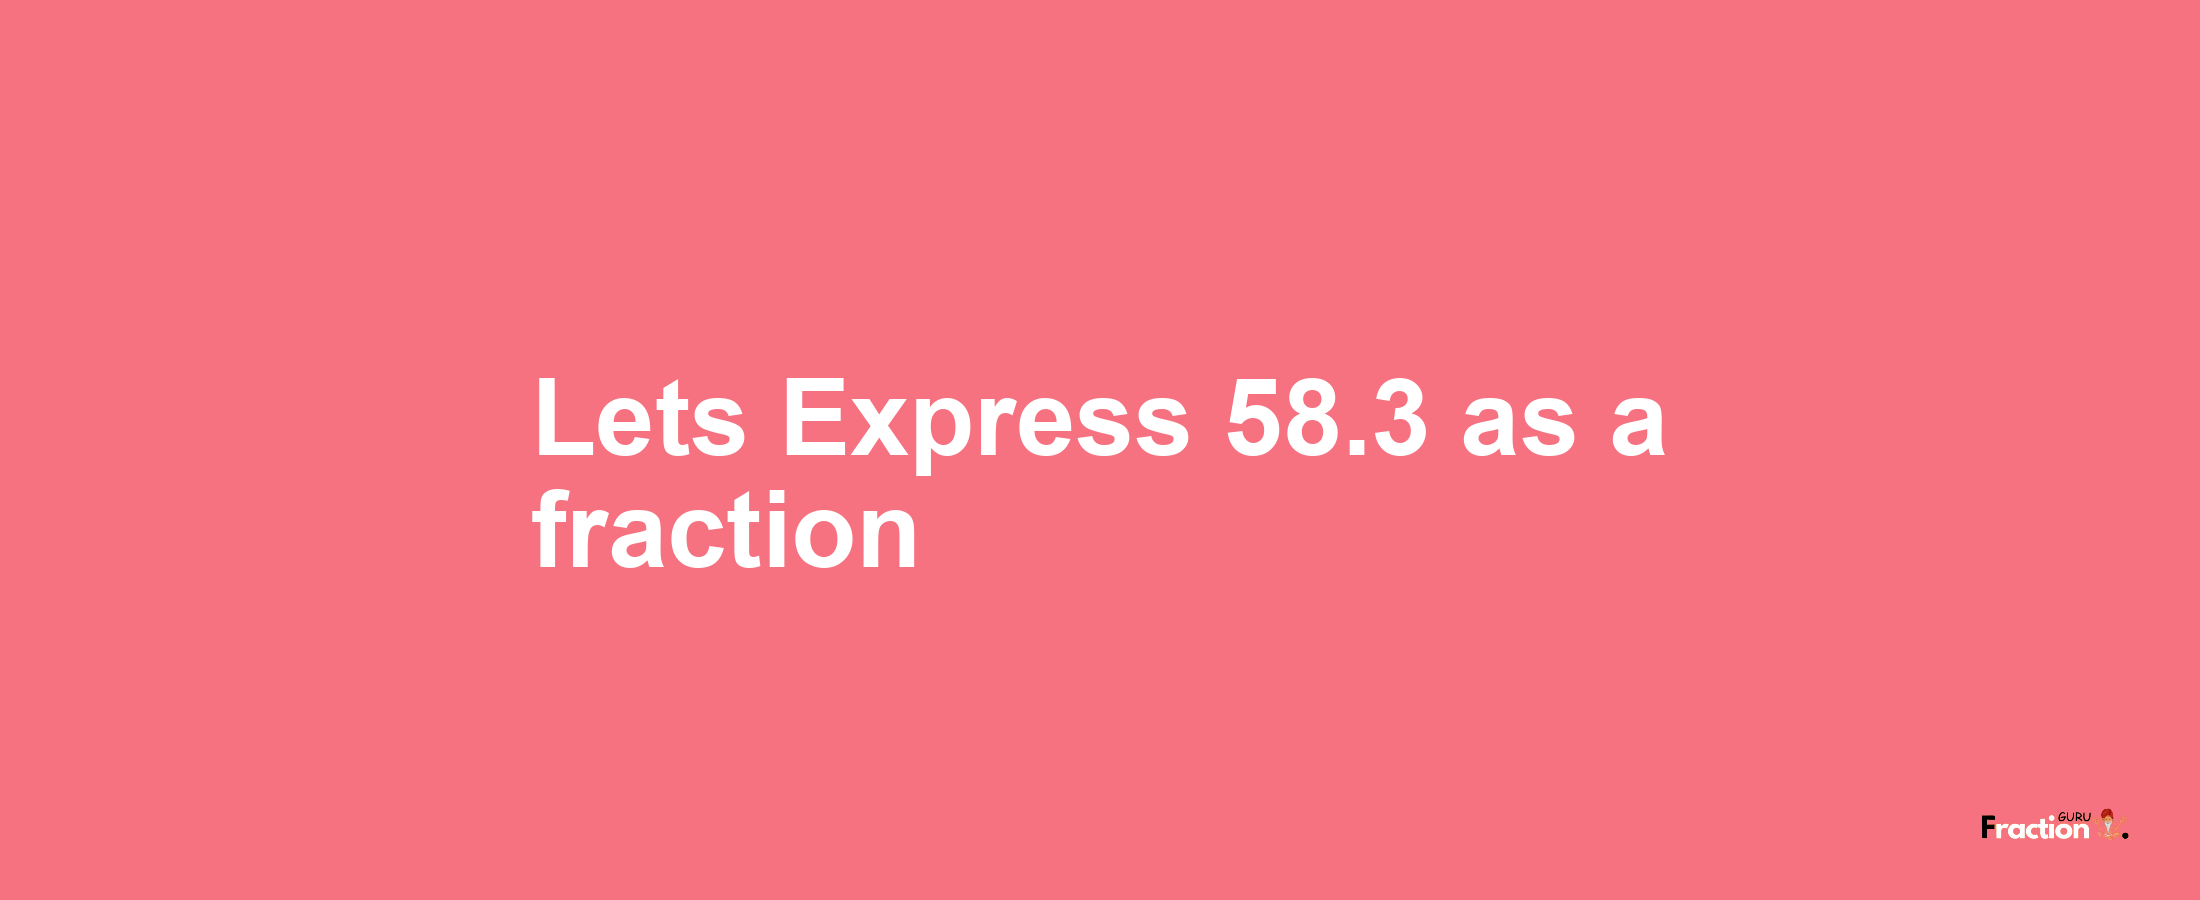 Lets Express 58.3 as afraction